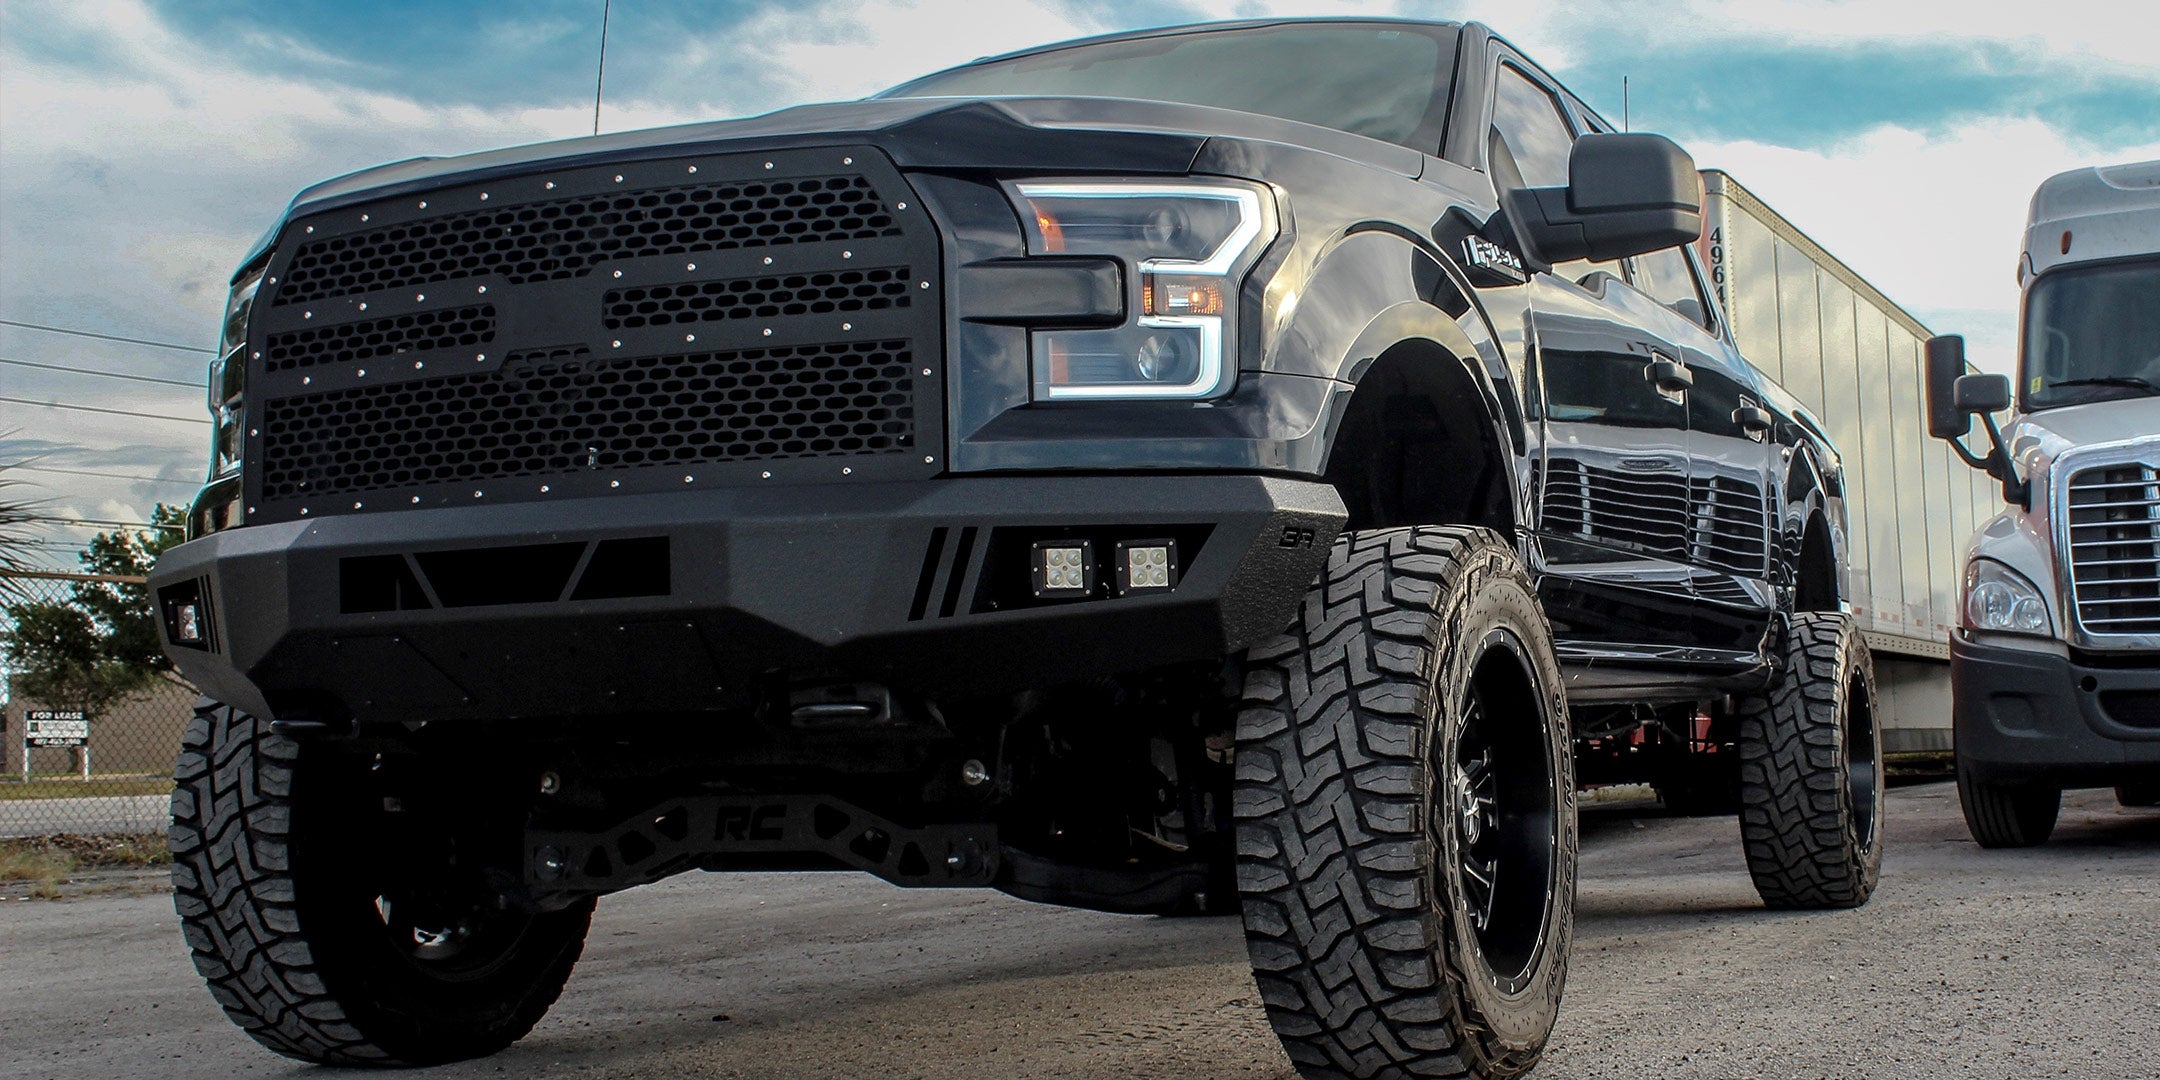 Body Armor 4x4 bumpers, side steps, and universal Ford products for your Ford 4x4 Truck.